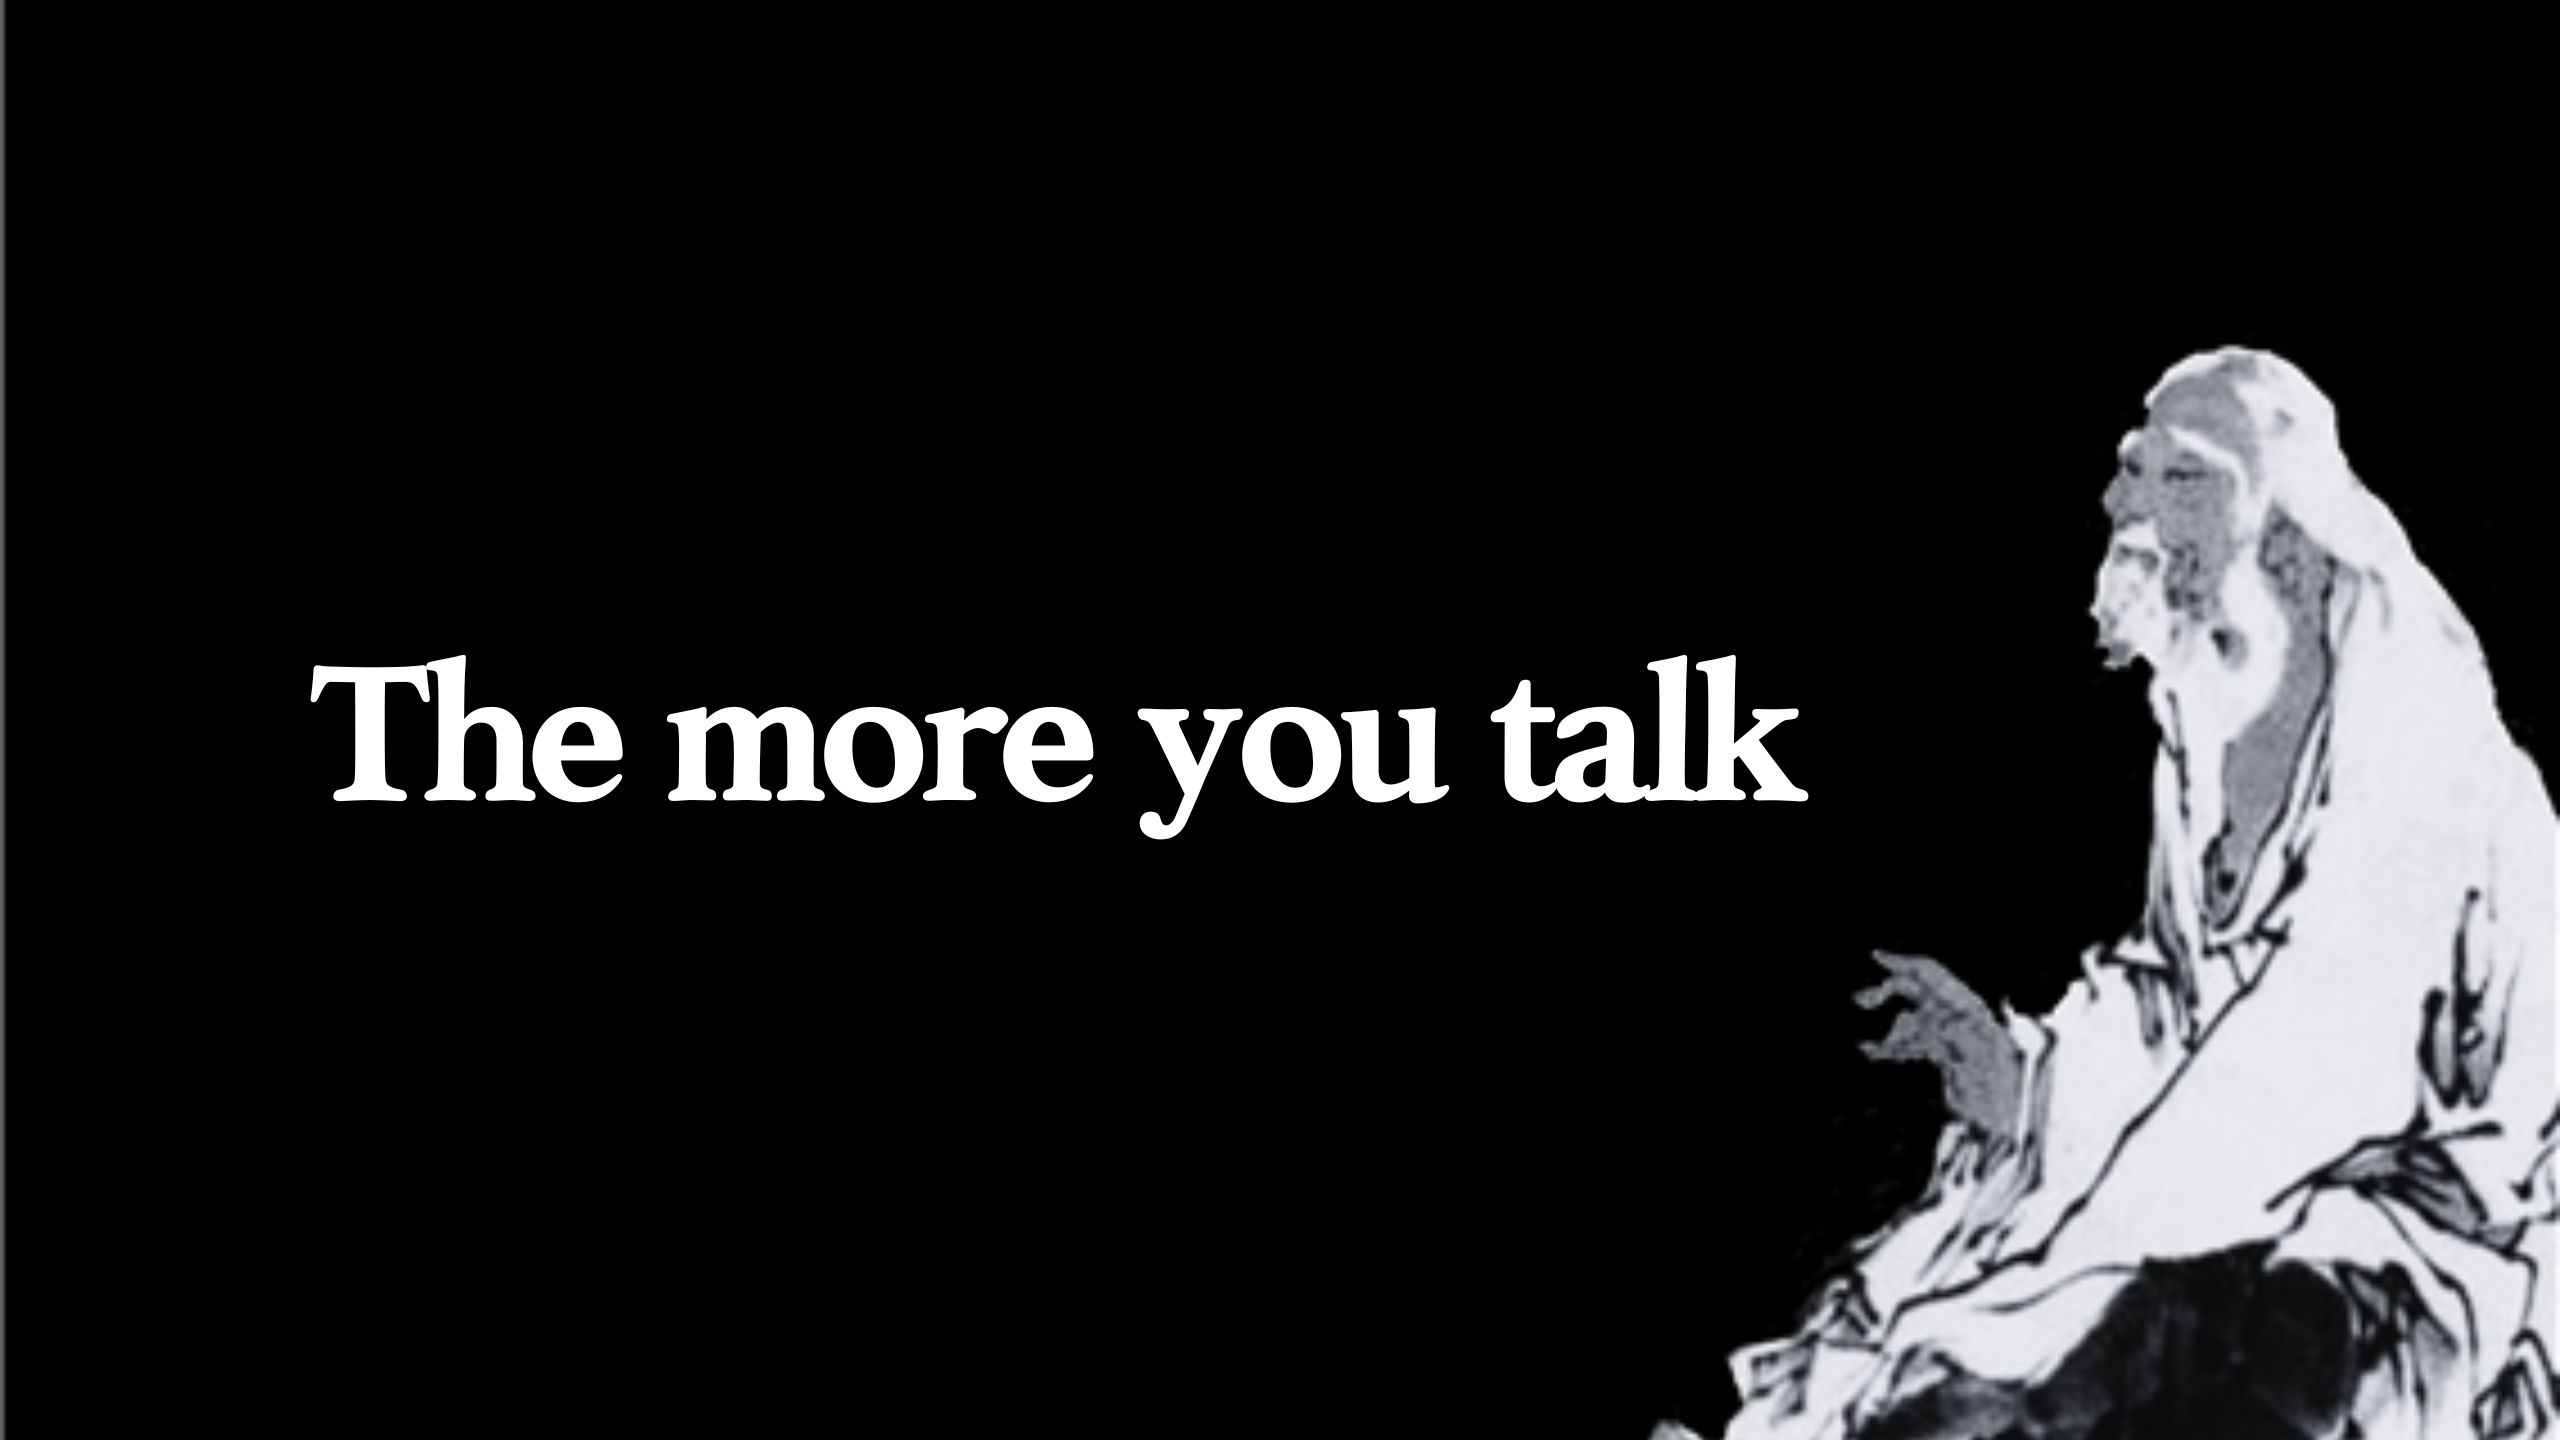 The more you talk